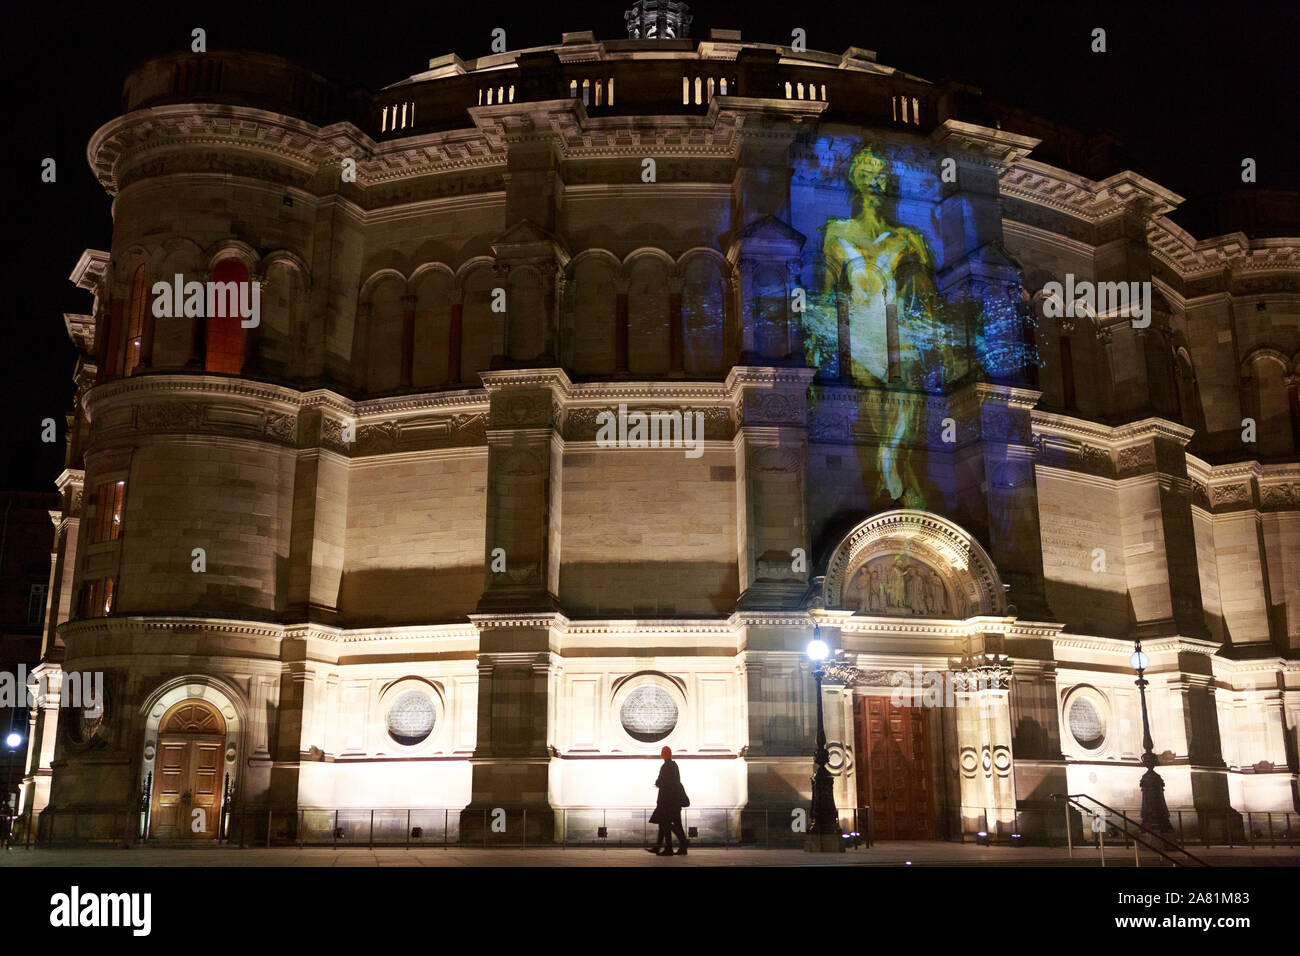 Edinburgh, Scotland. 5 November. 2019. Press call to celebrate their 2020/2021 season launch, Scottish Ballet collaborated with artist Alan McGowan to create a specially commissioned visual art projection that was unveiled in Edinburgh. Photo: Images projected onto University of Edinburgh’s McEwan Hall building. Pako Mera/Alamy Live News Stock Photo